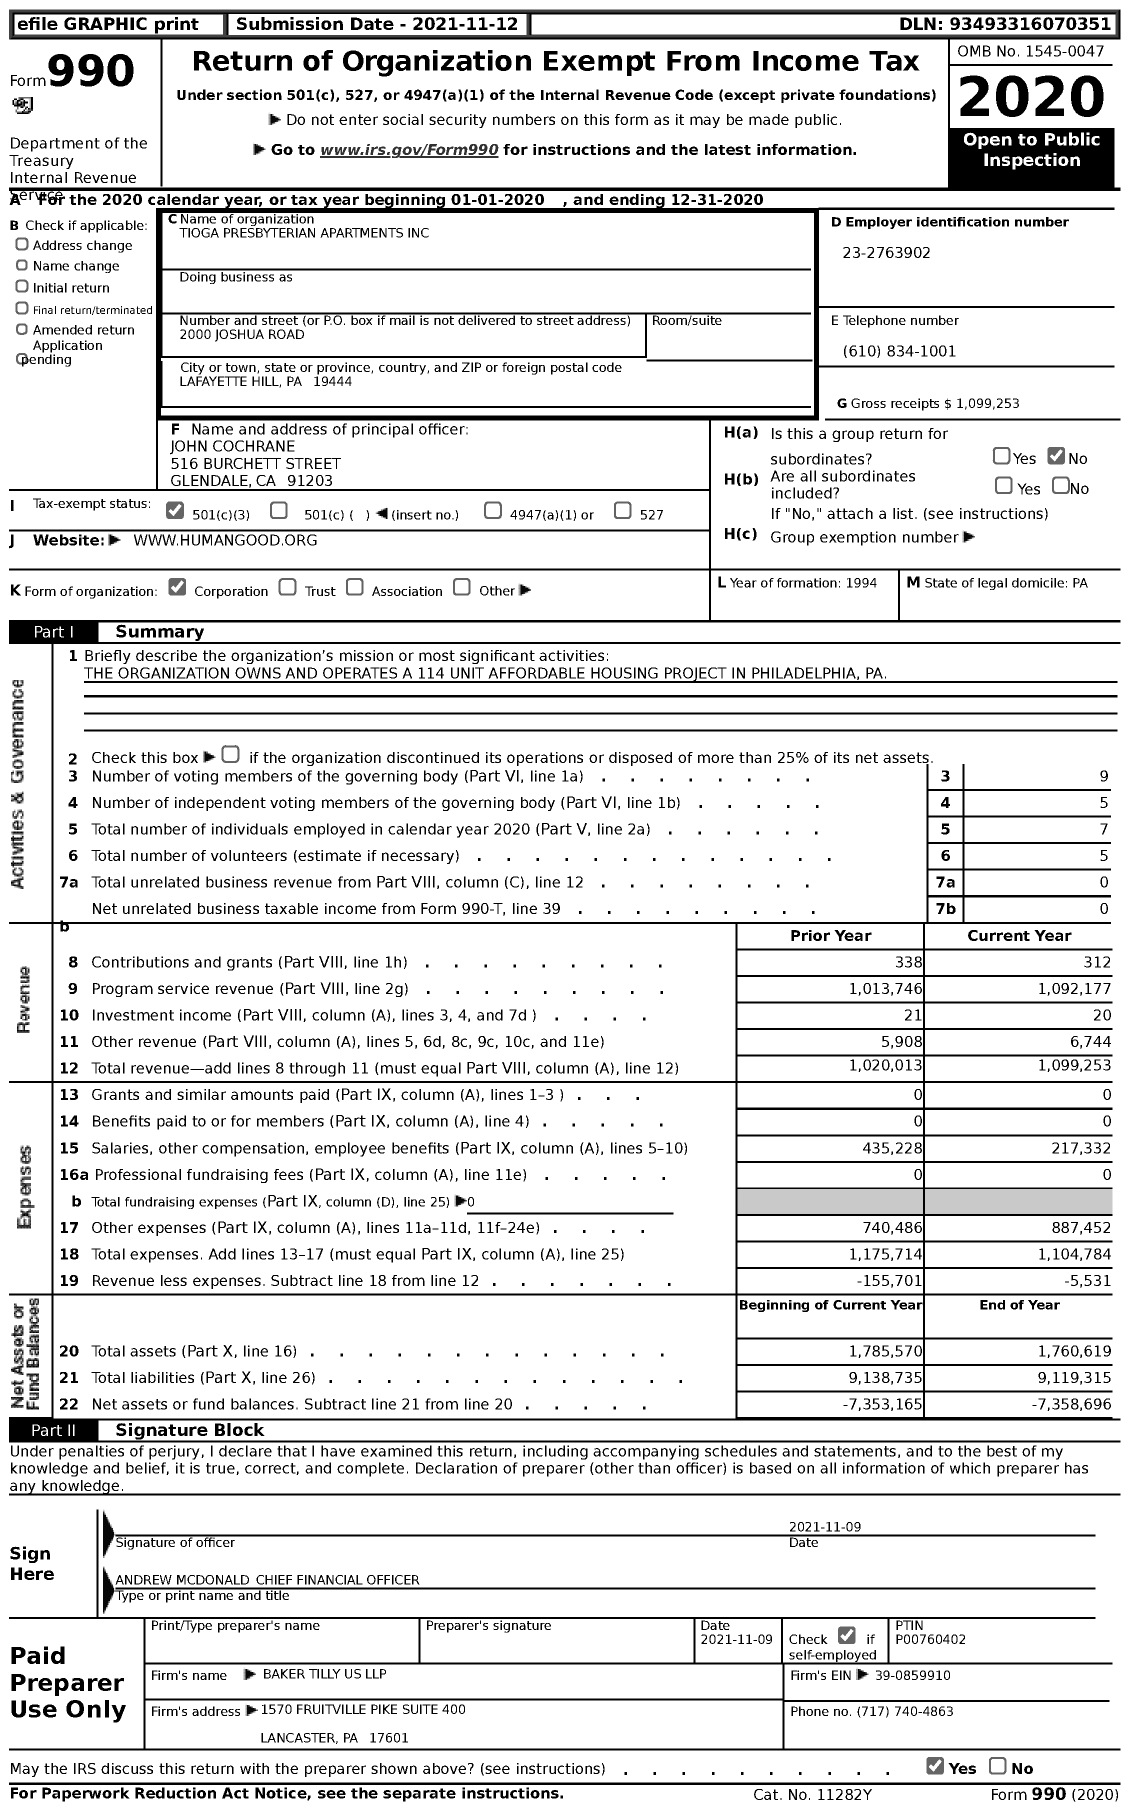 Image of first page of 2020 Form 990 for Tioga Presbyterian Apartments